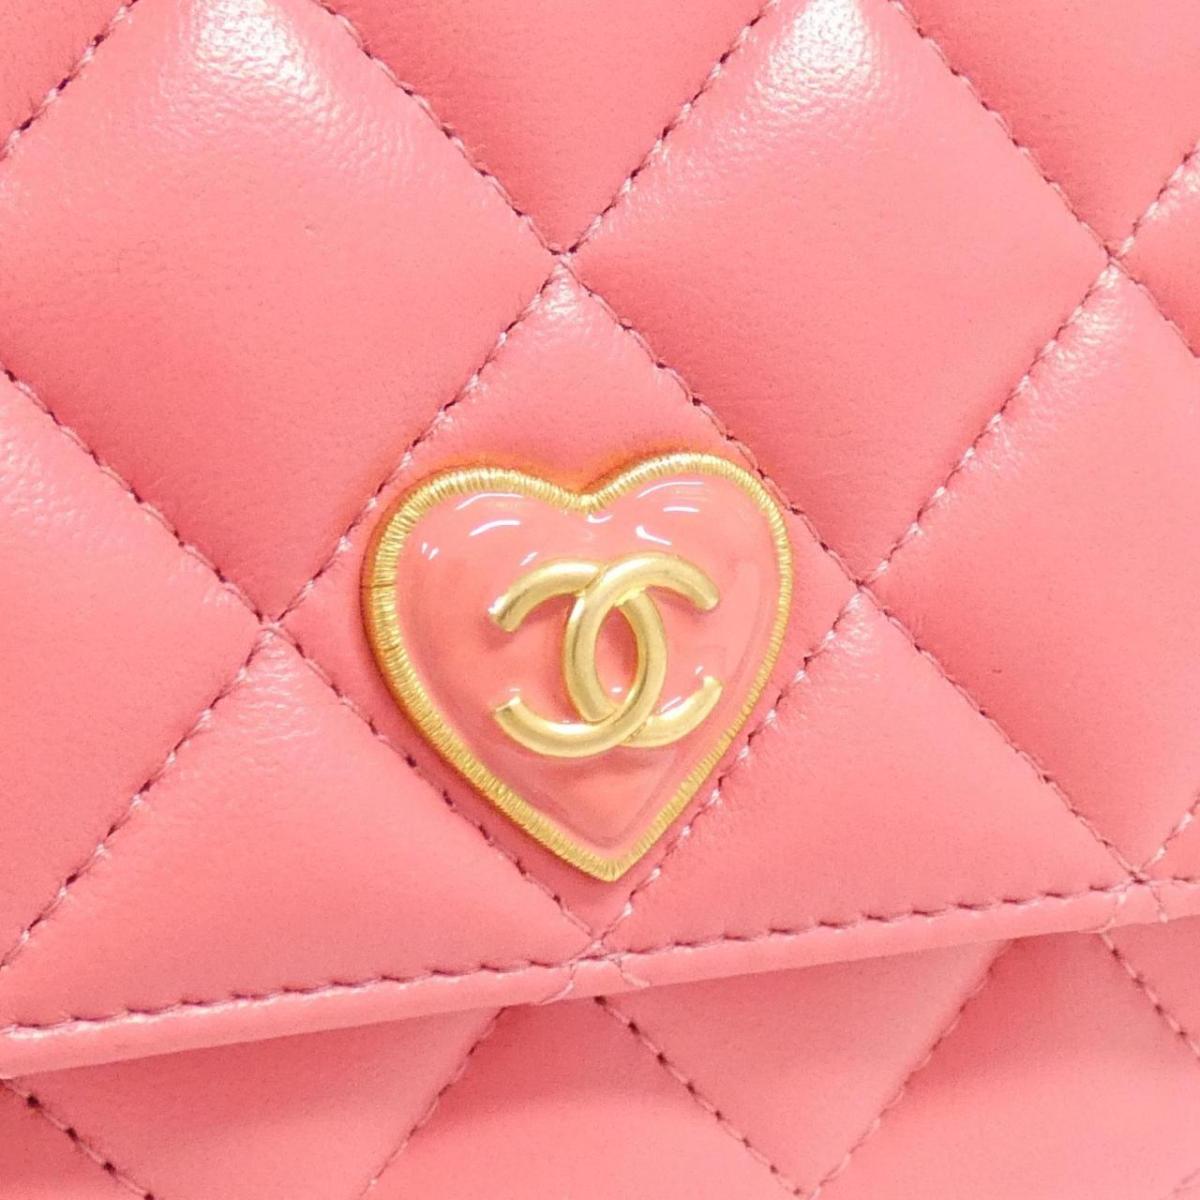 Chanel AP3392 Coin Pouch